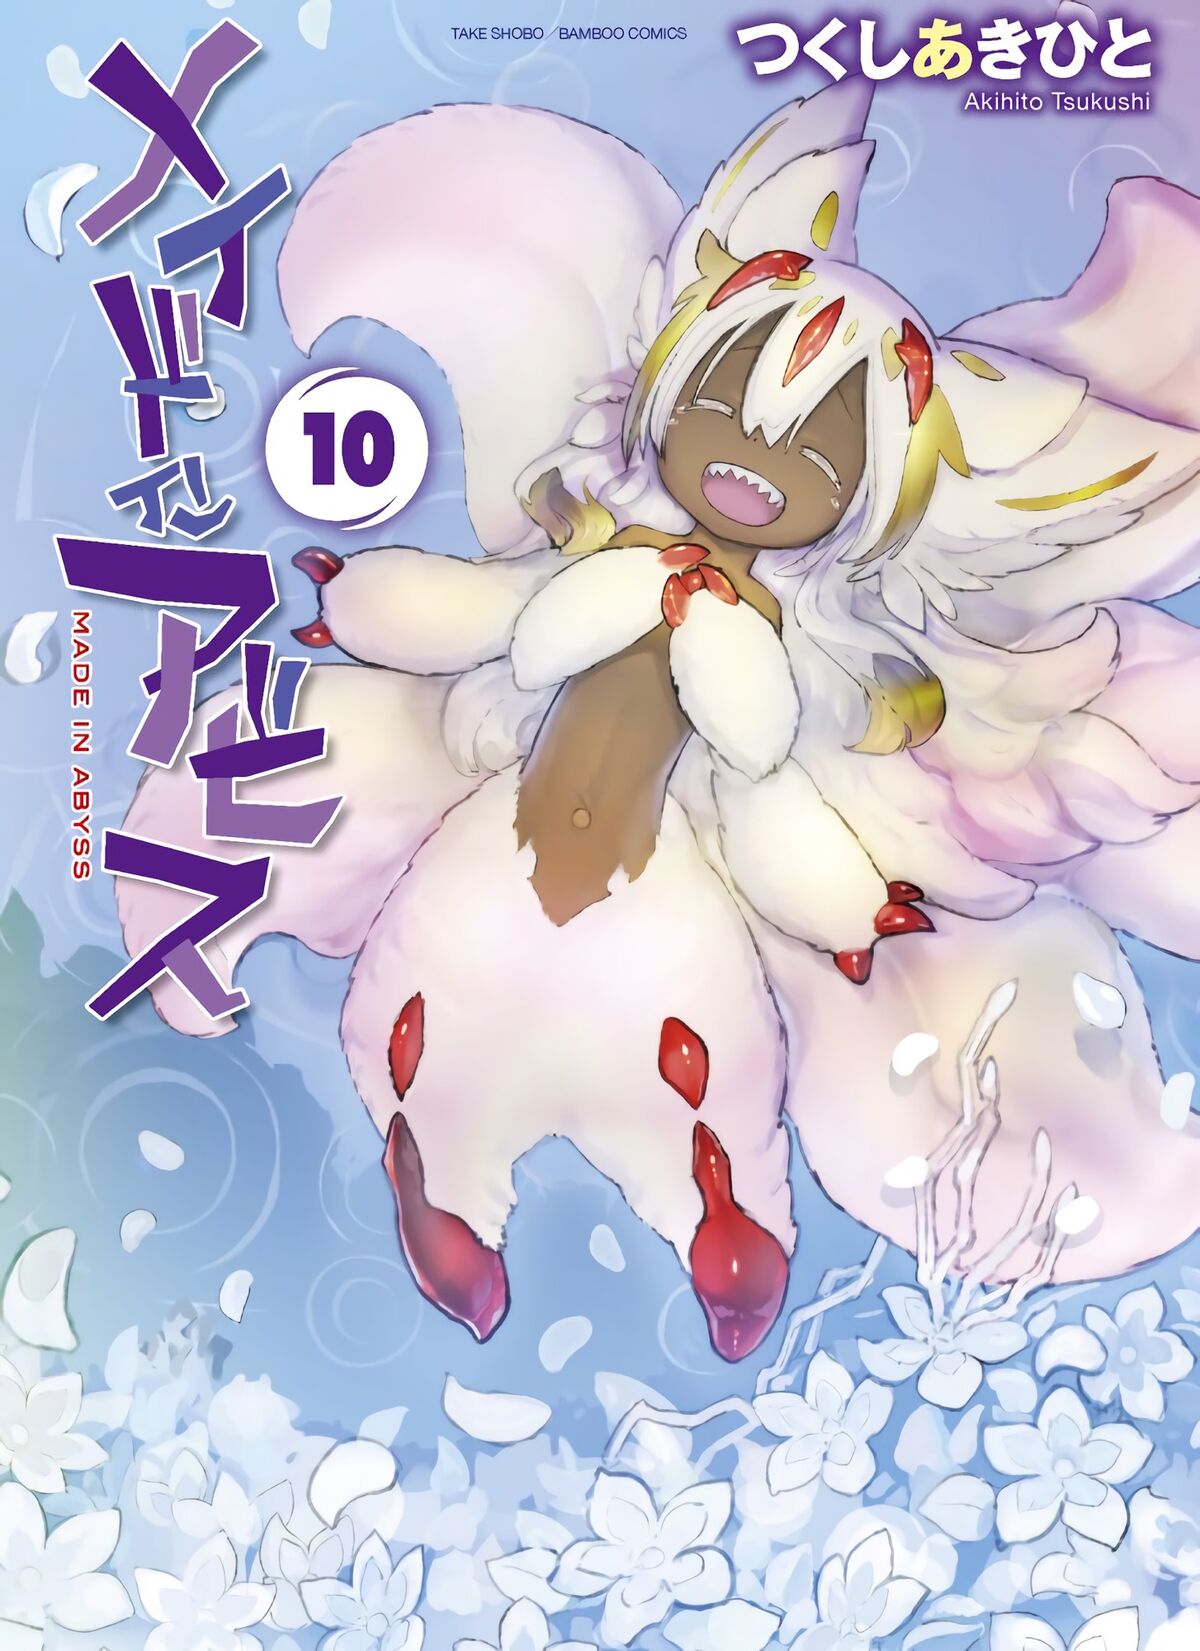 Made in Abyss Vol. 8 (Paperback)